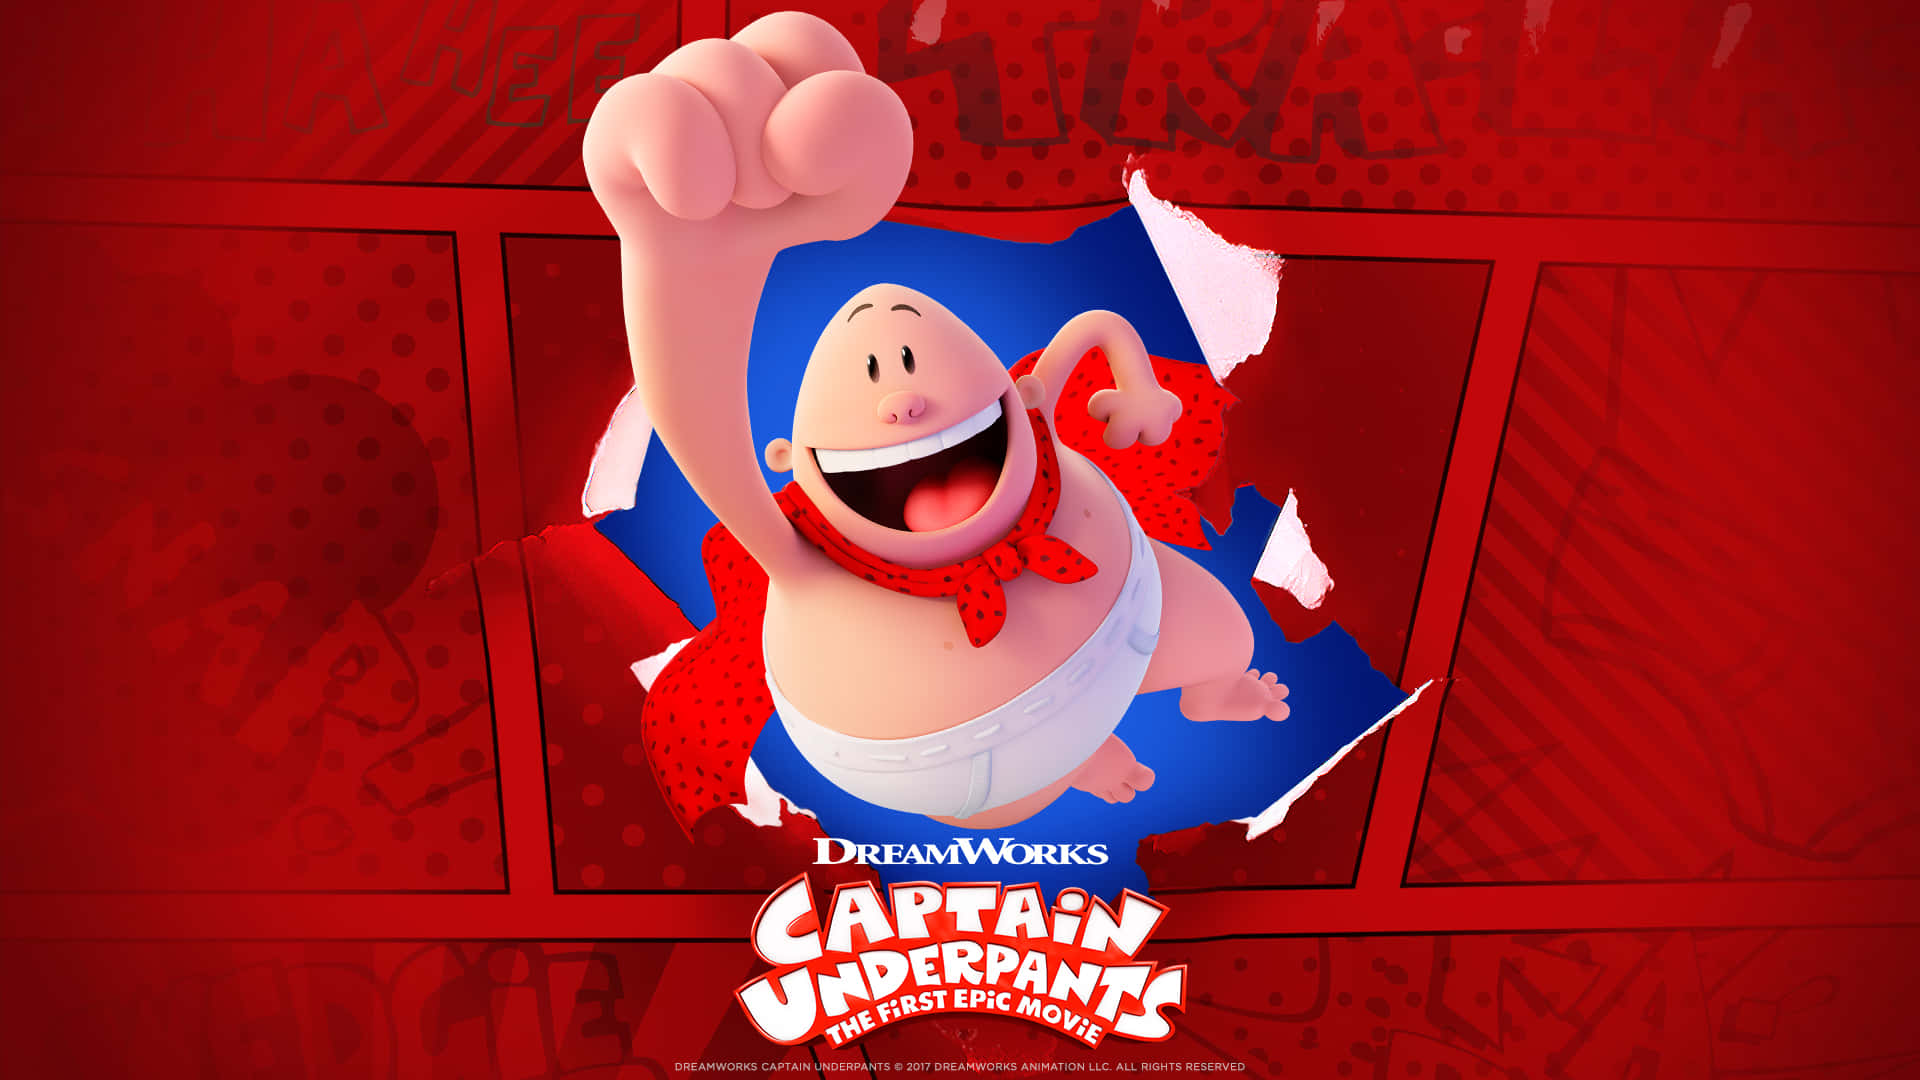 An attempt at coloring the unreleased Captain Underpants Cartoon-o